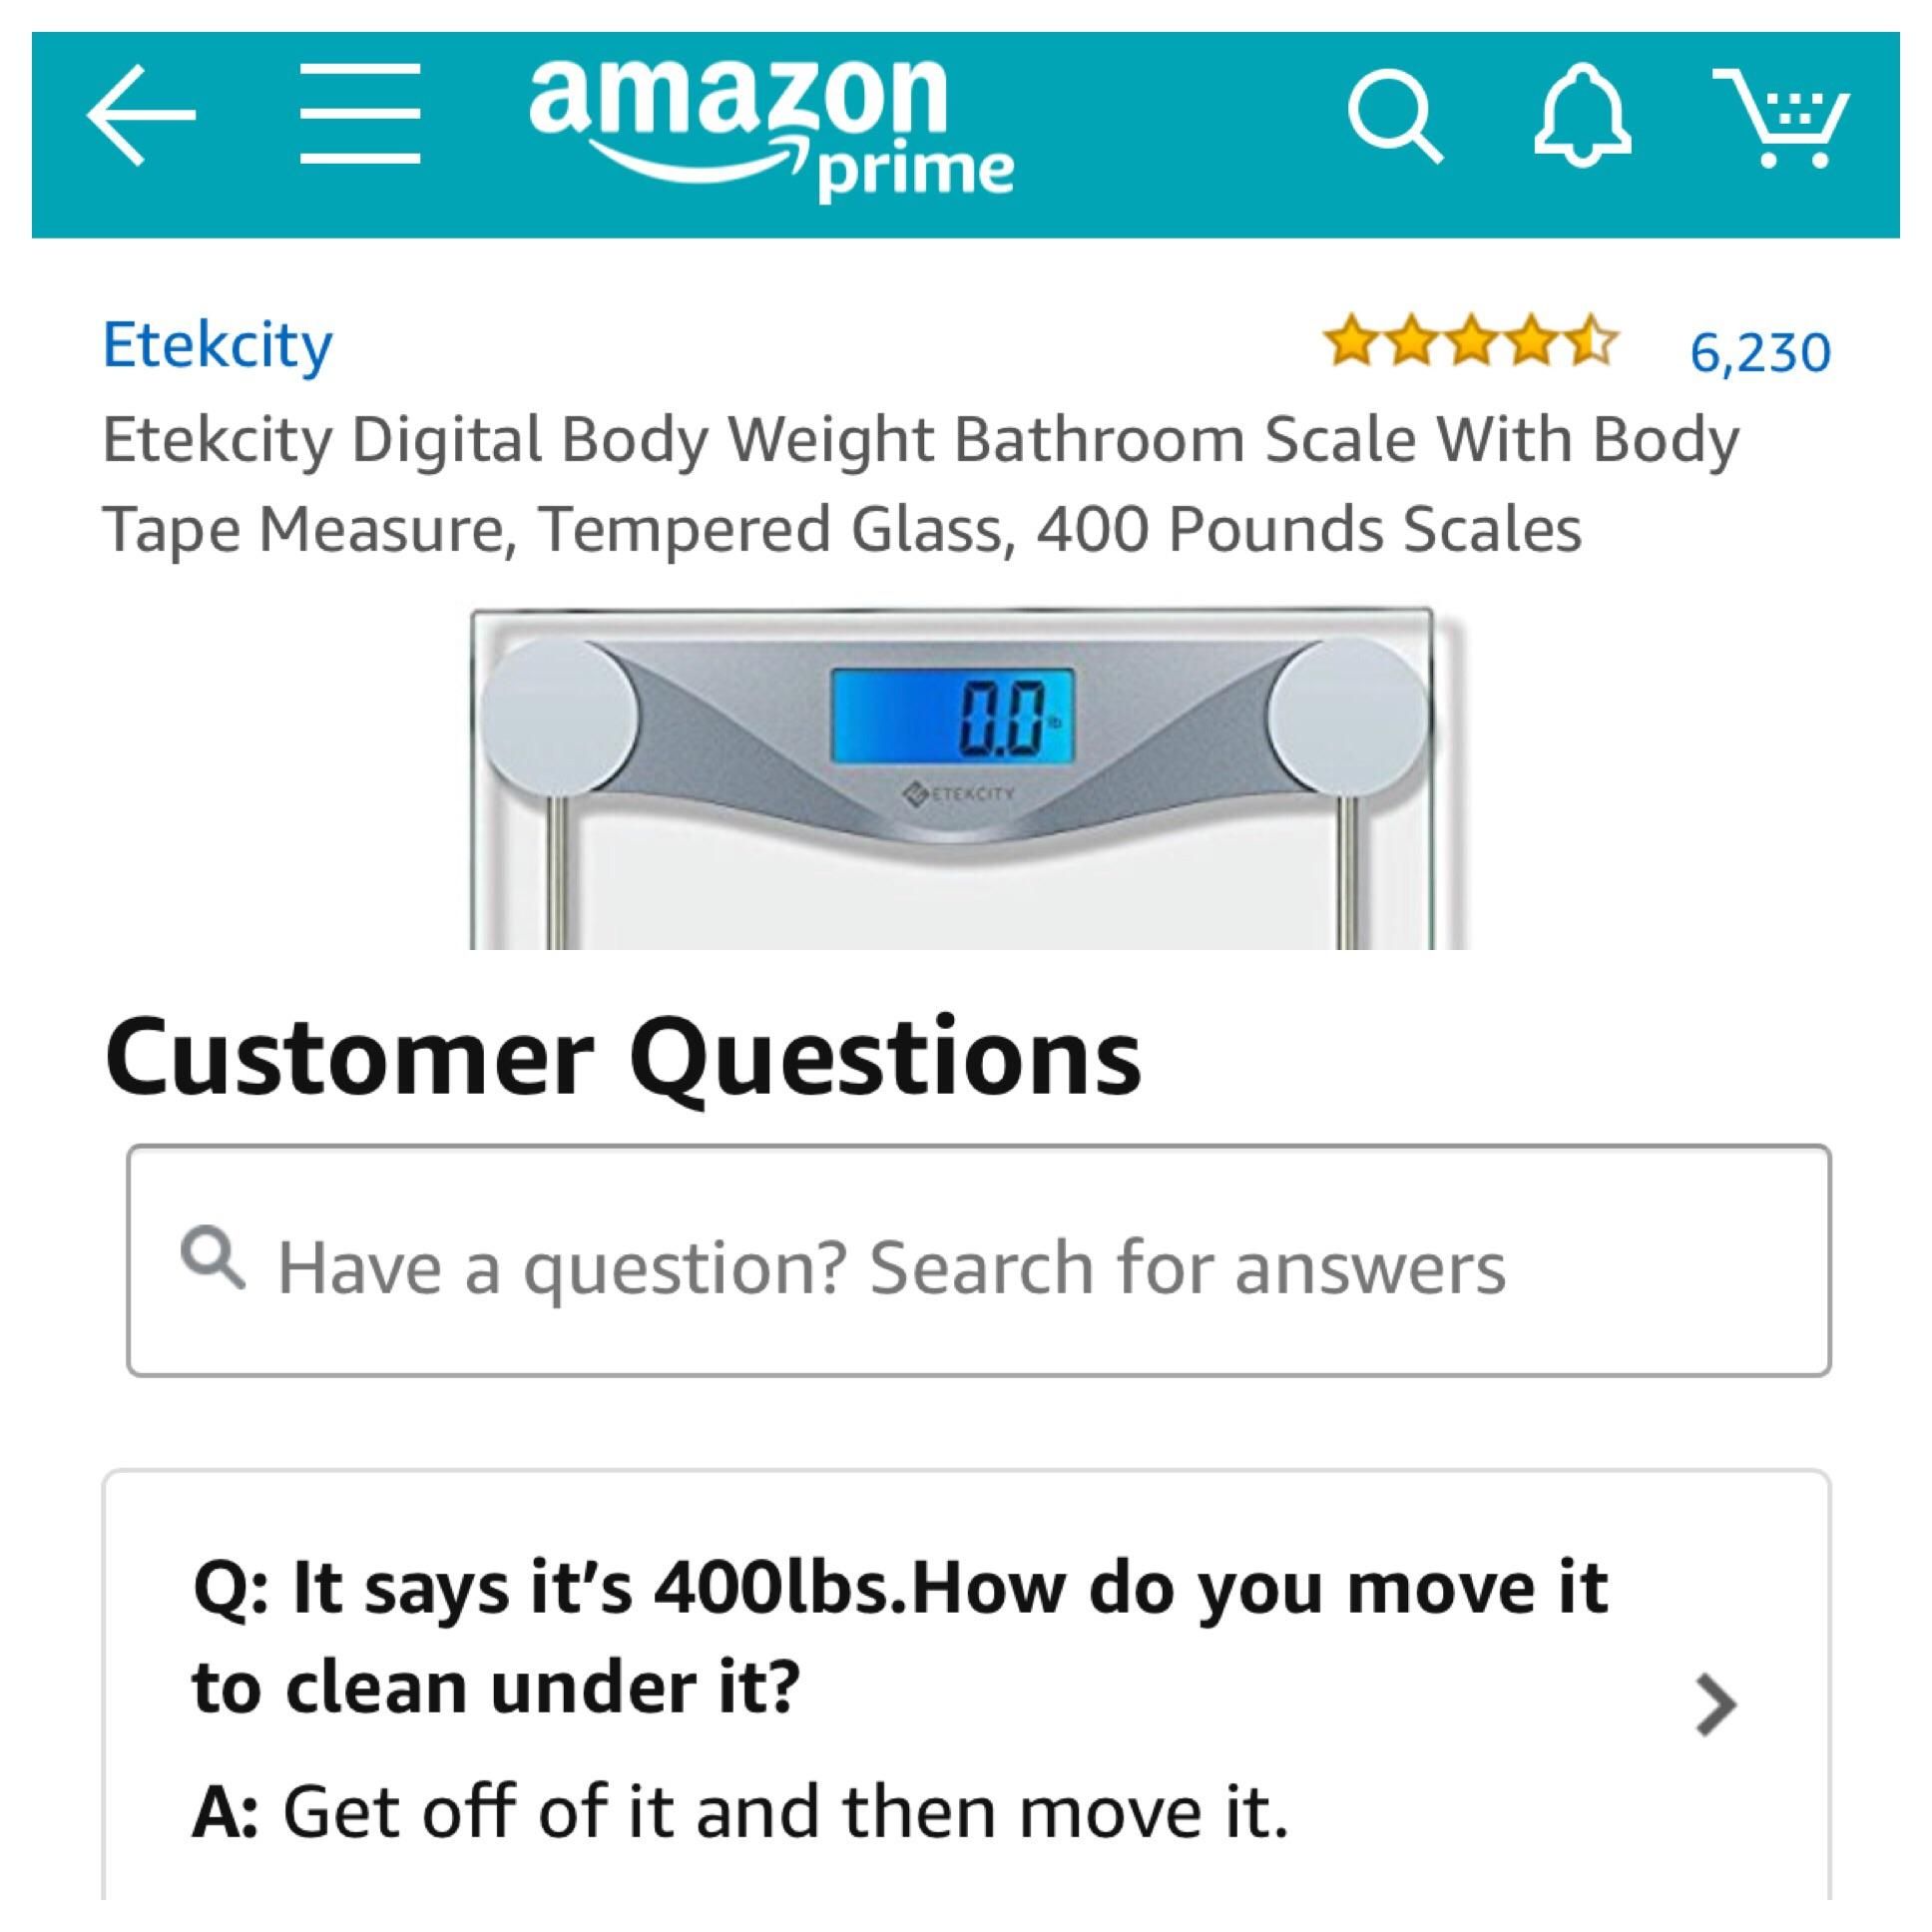 The real pro tip is in the customer questions.